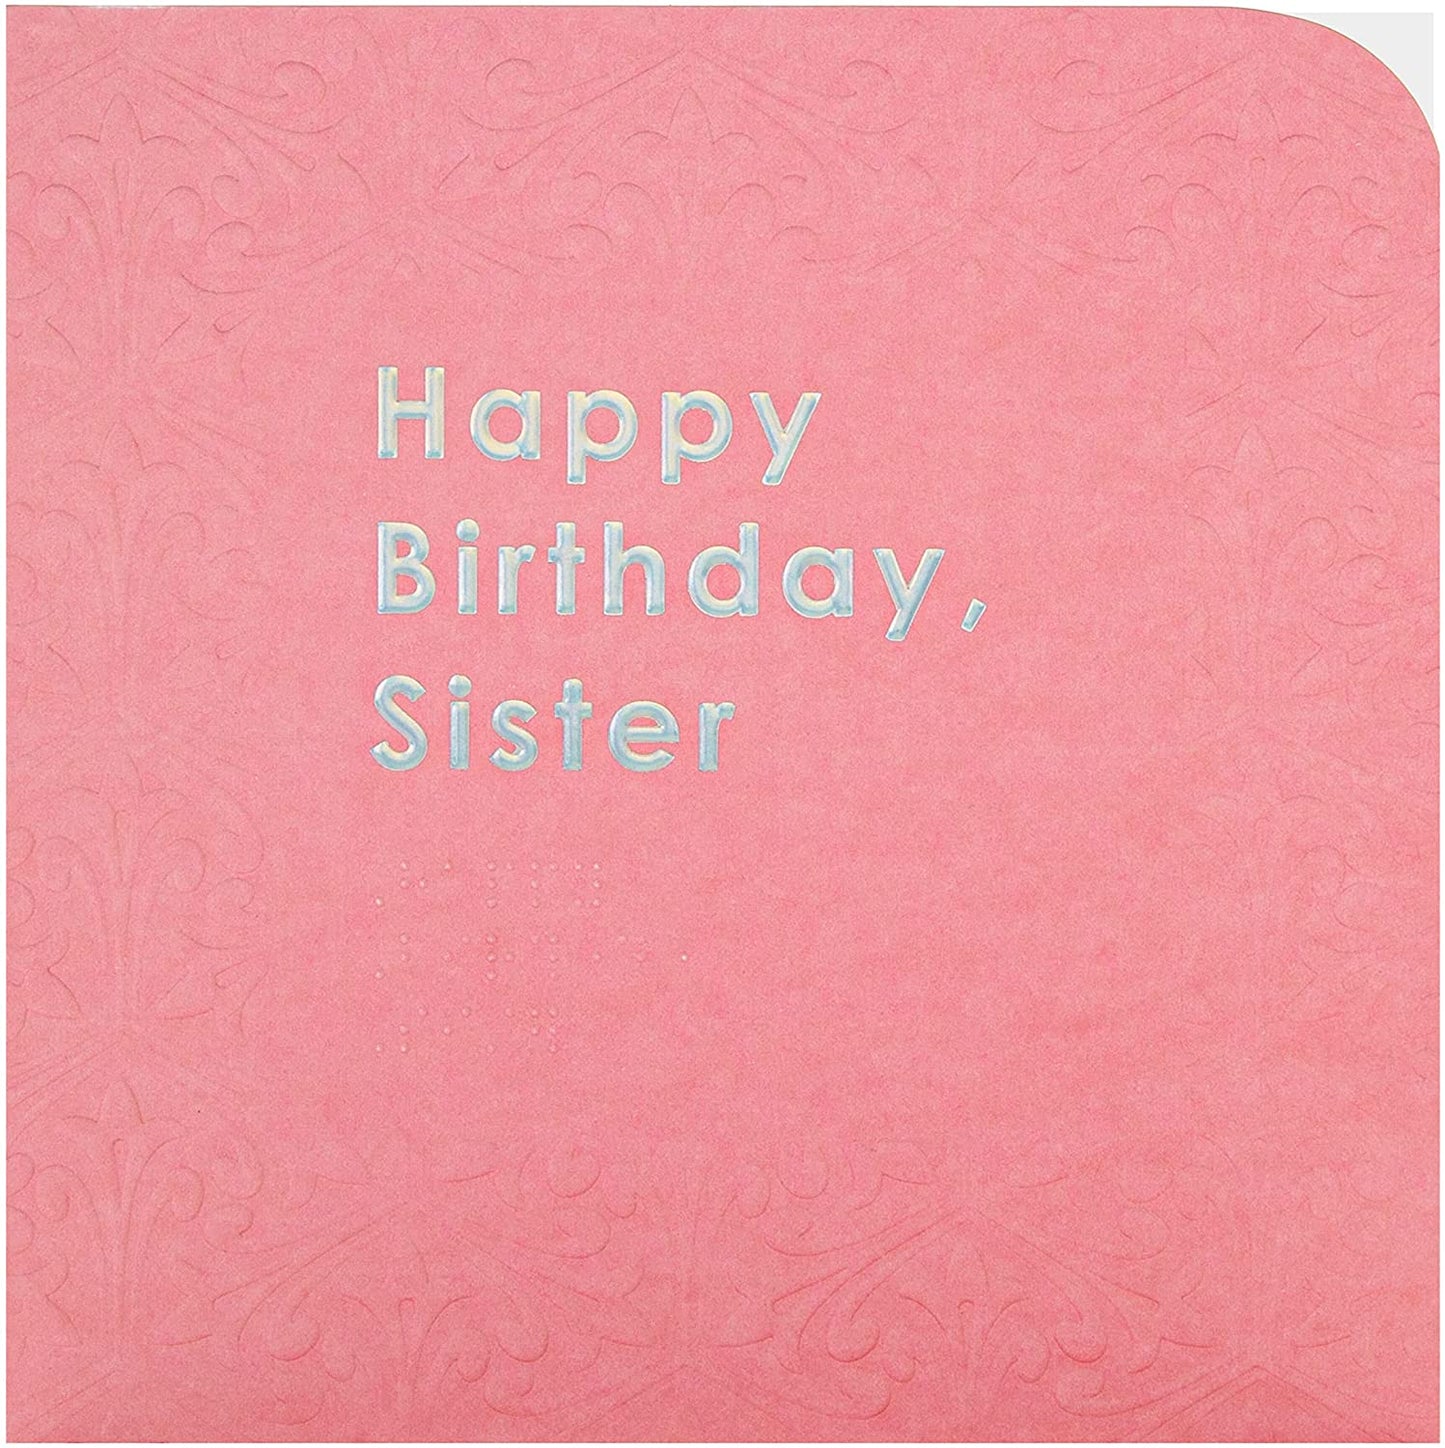 Contemporary Patterned Design Braille Birthday Card for Sister